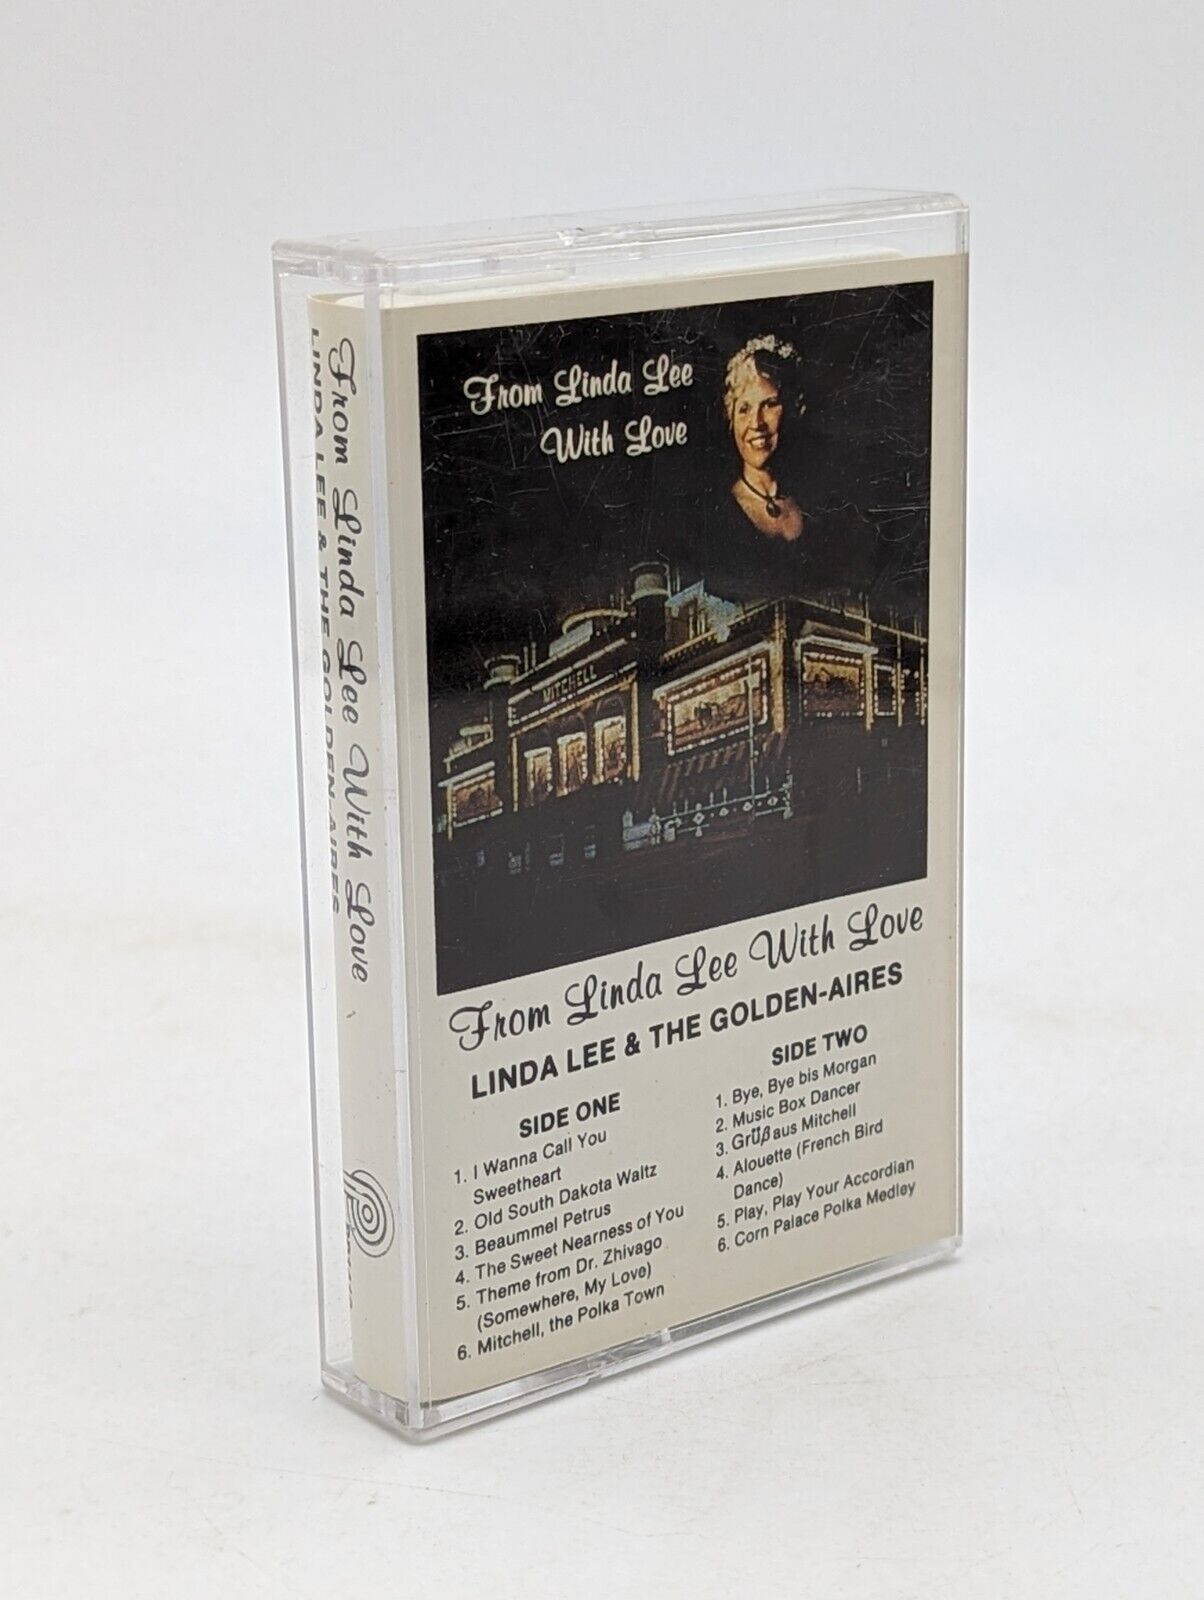 From Linda Lee With Love Linda Lee & The Golden-Aires Cassette Tape 1985 HTF